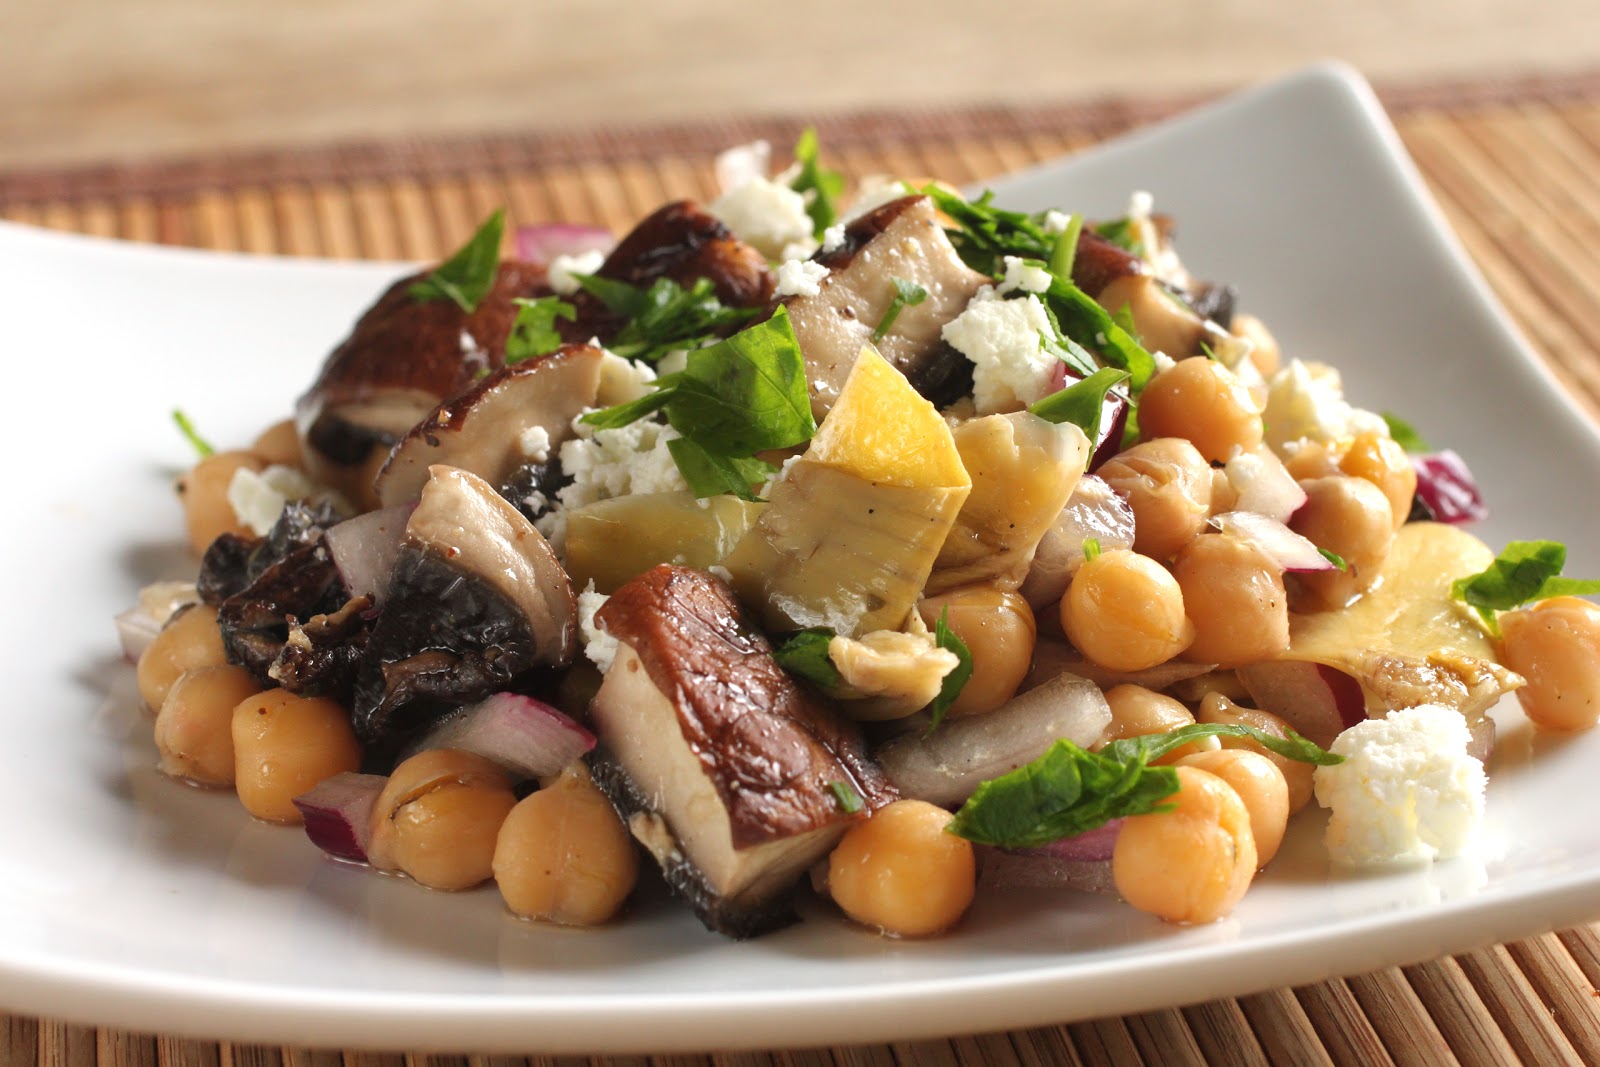 Chickpea salad with mushrooms and feta